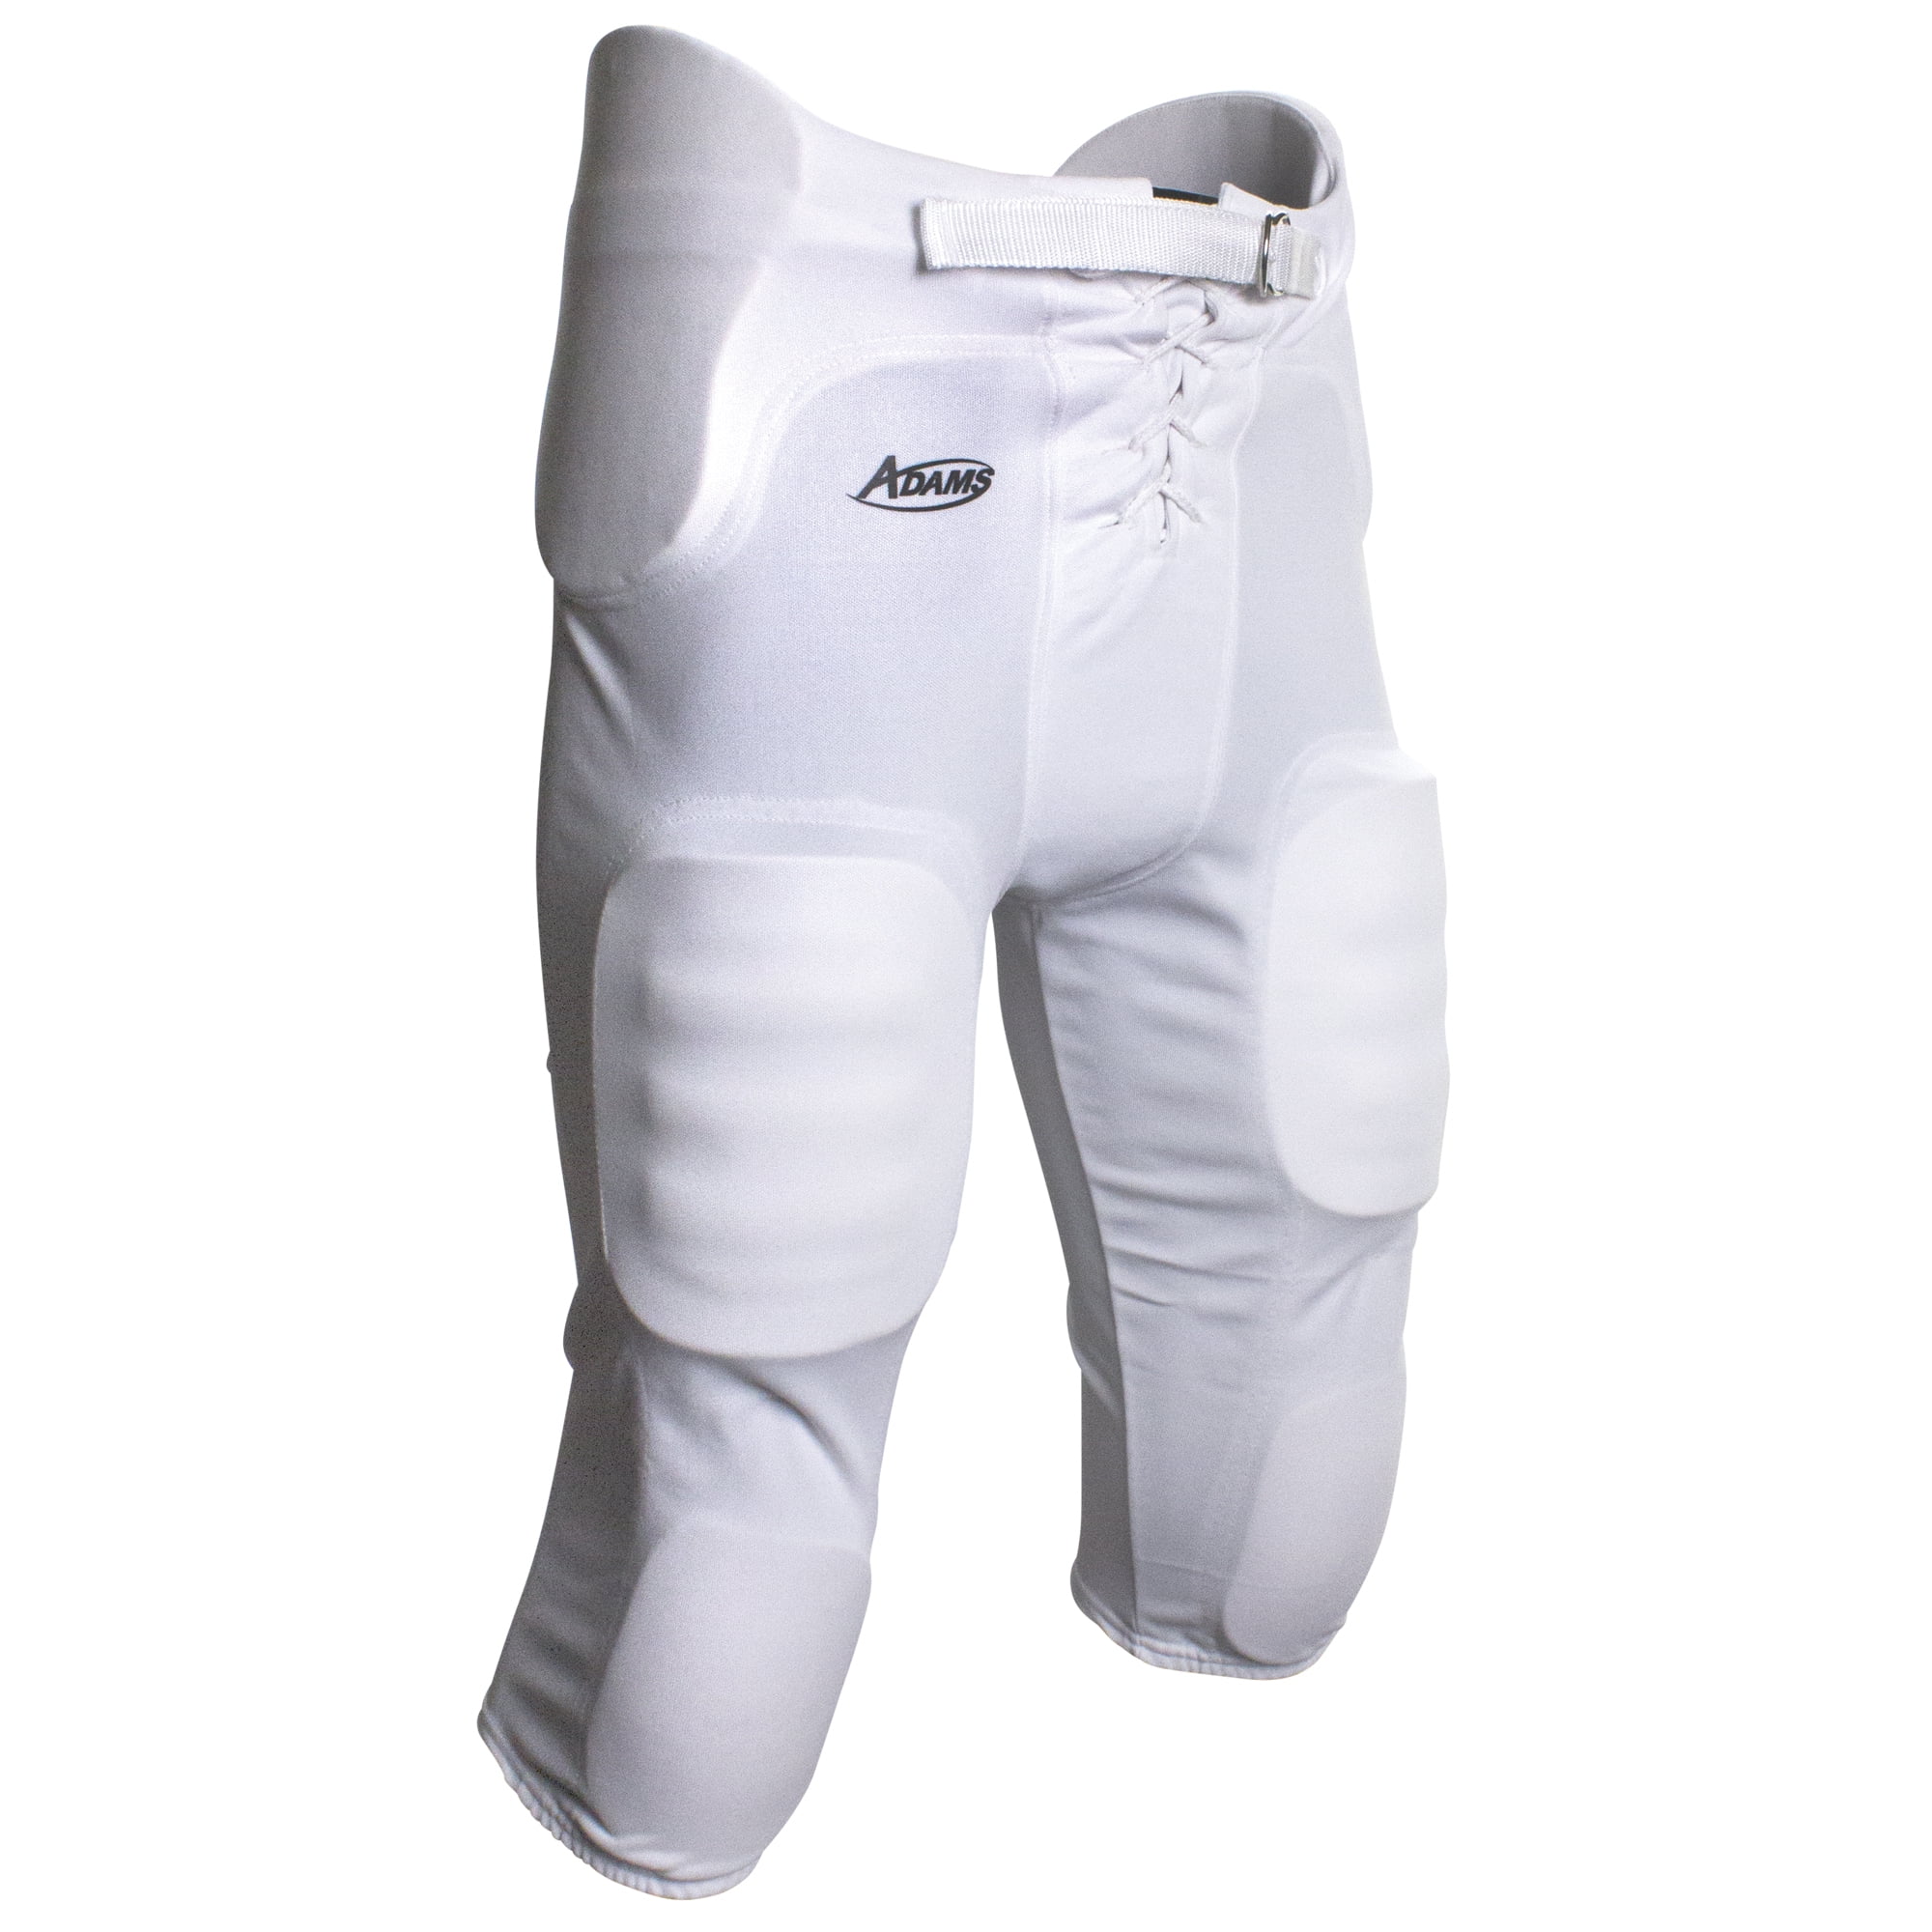 Bike Athletic White Football Practice Pants Youth NEW Retails $19.99 